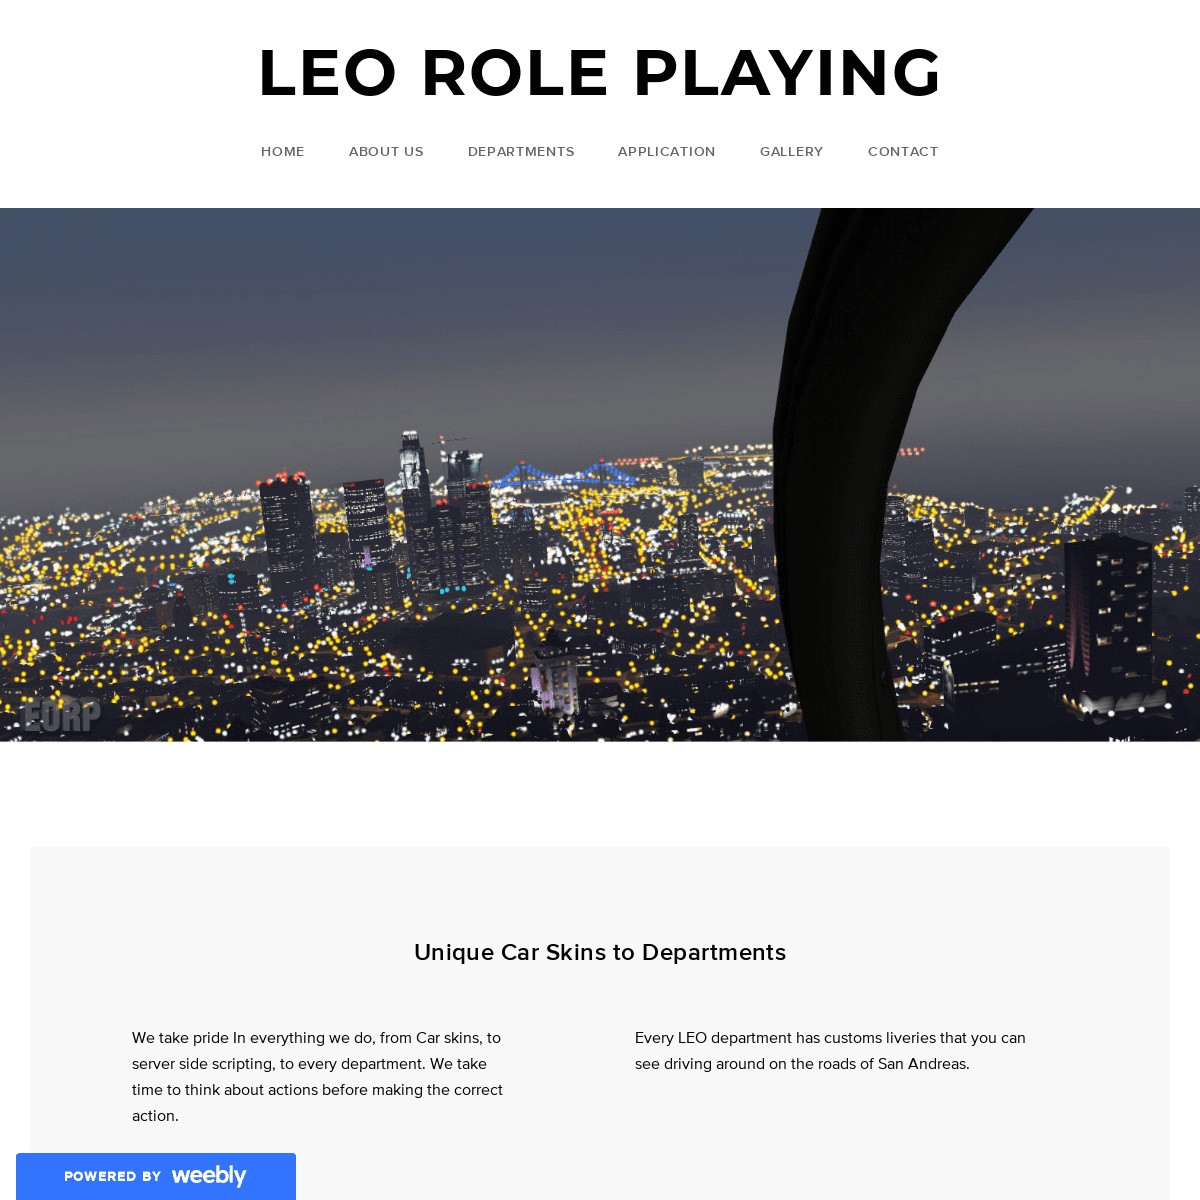 LEO ROLE PLAYING - Home